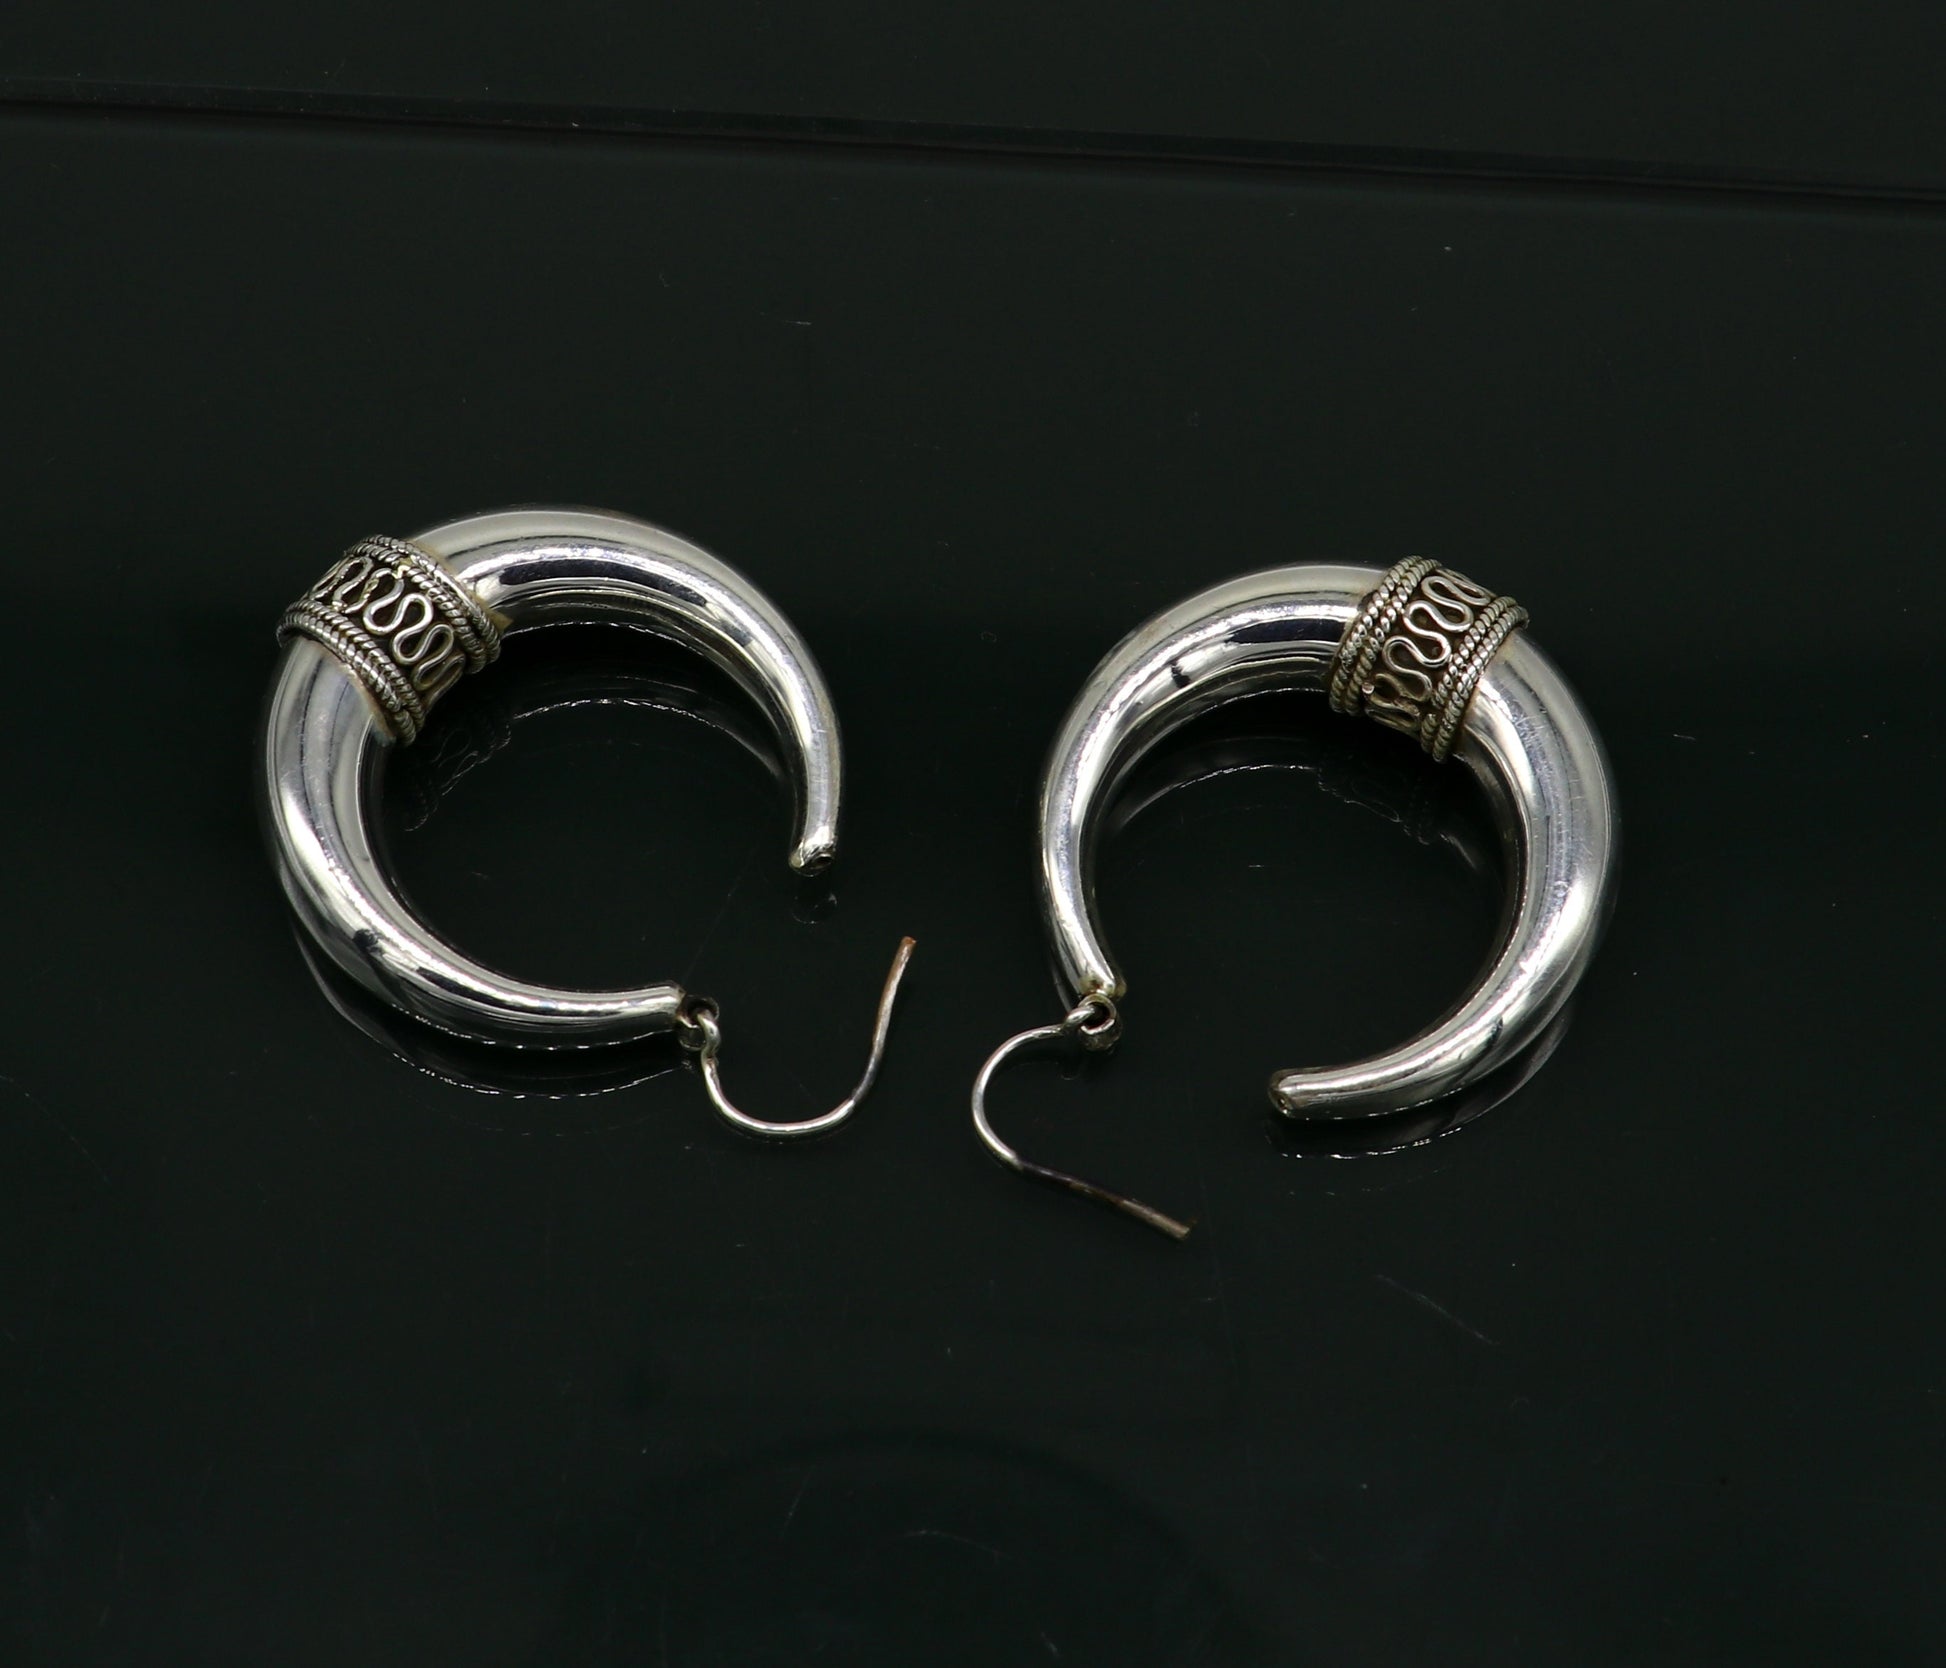 Vintage Design 925 sterling silver fabulous hoops earring, tribal kundal earring from Rajasthan India, best gifting unisex jewelry ear612 - TRIBAL ORNAMENTS